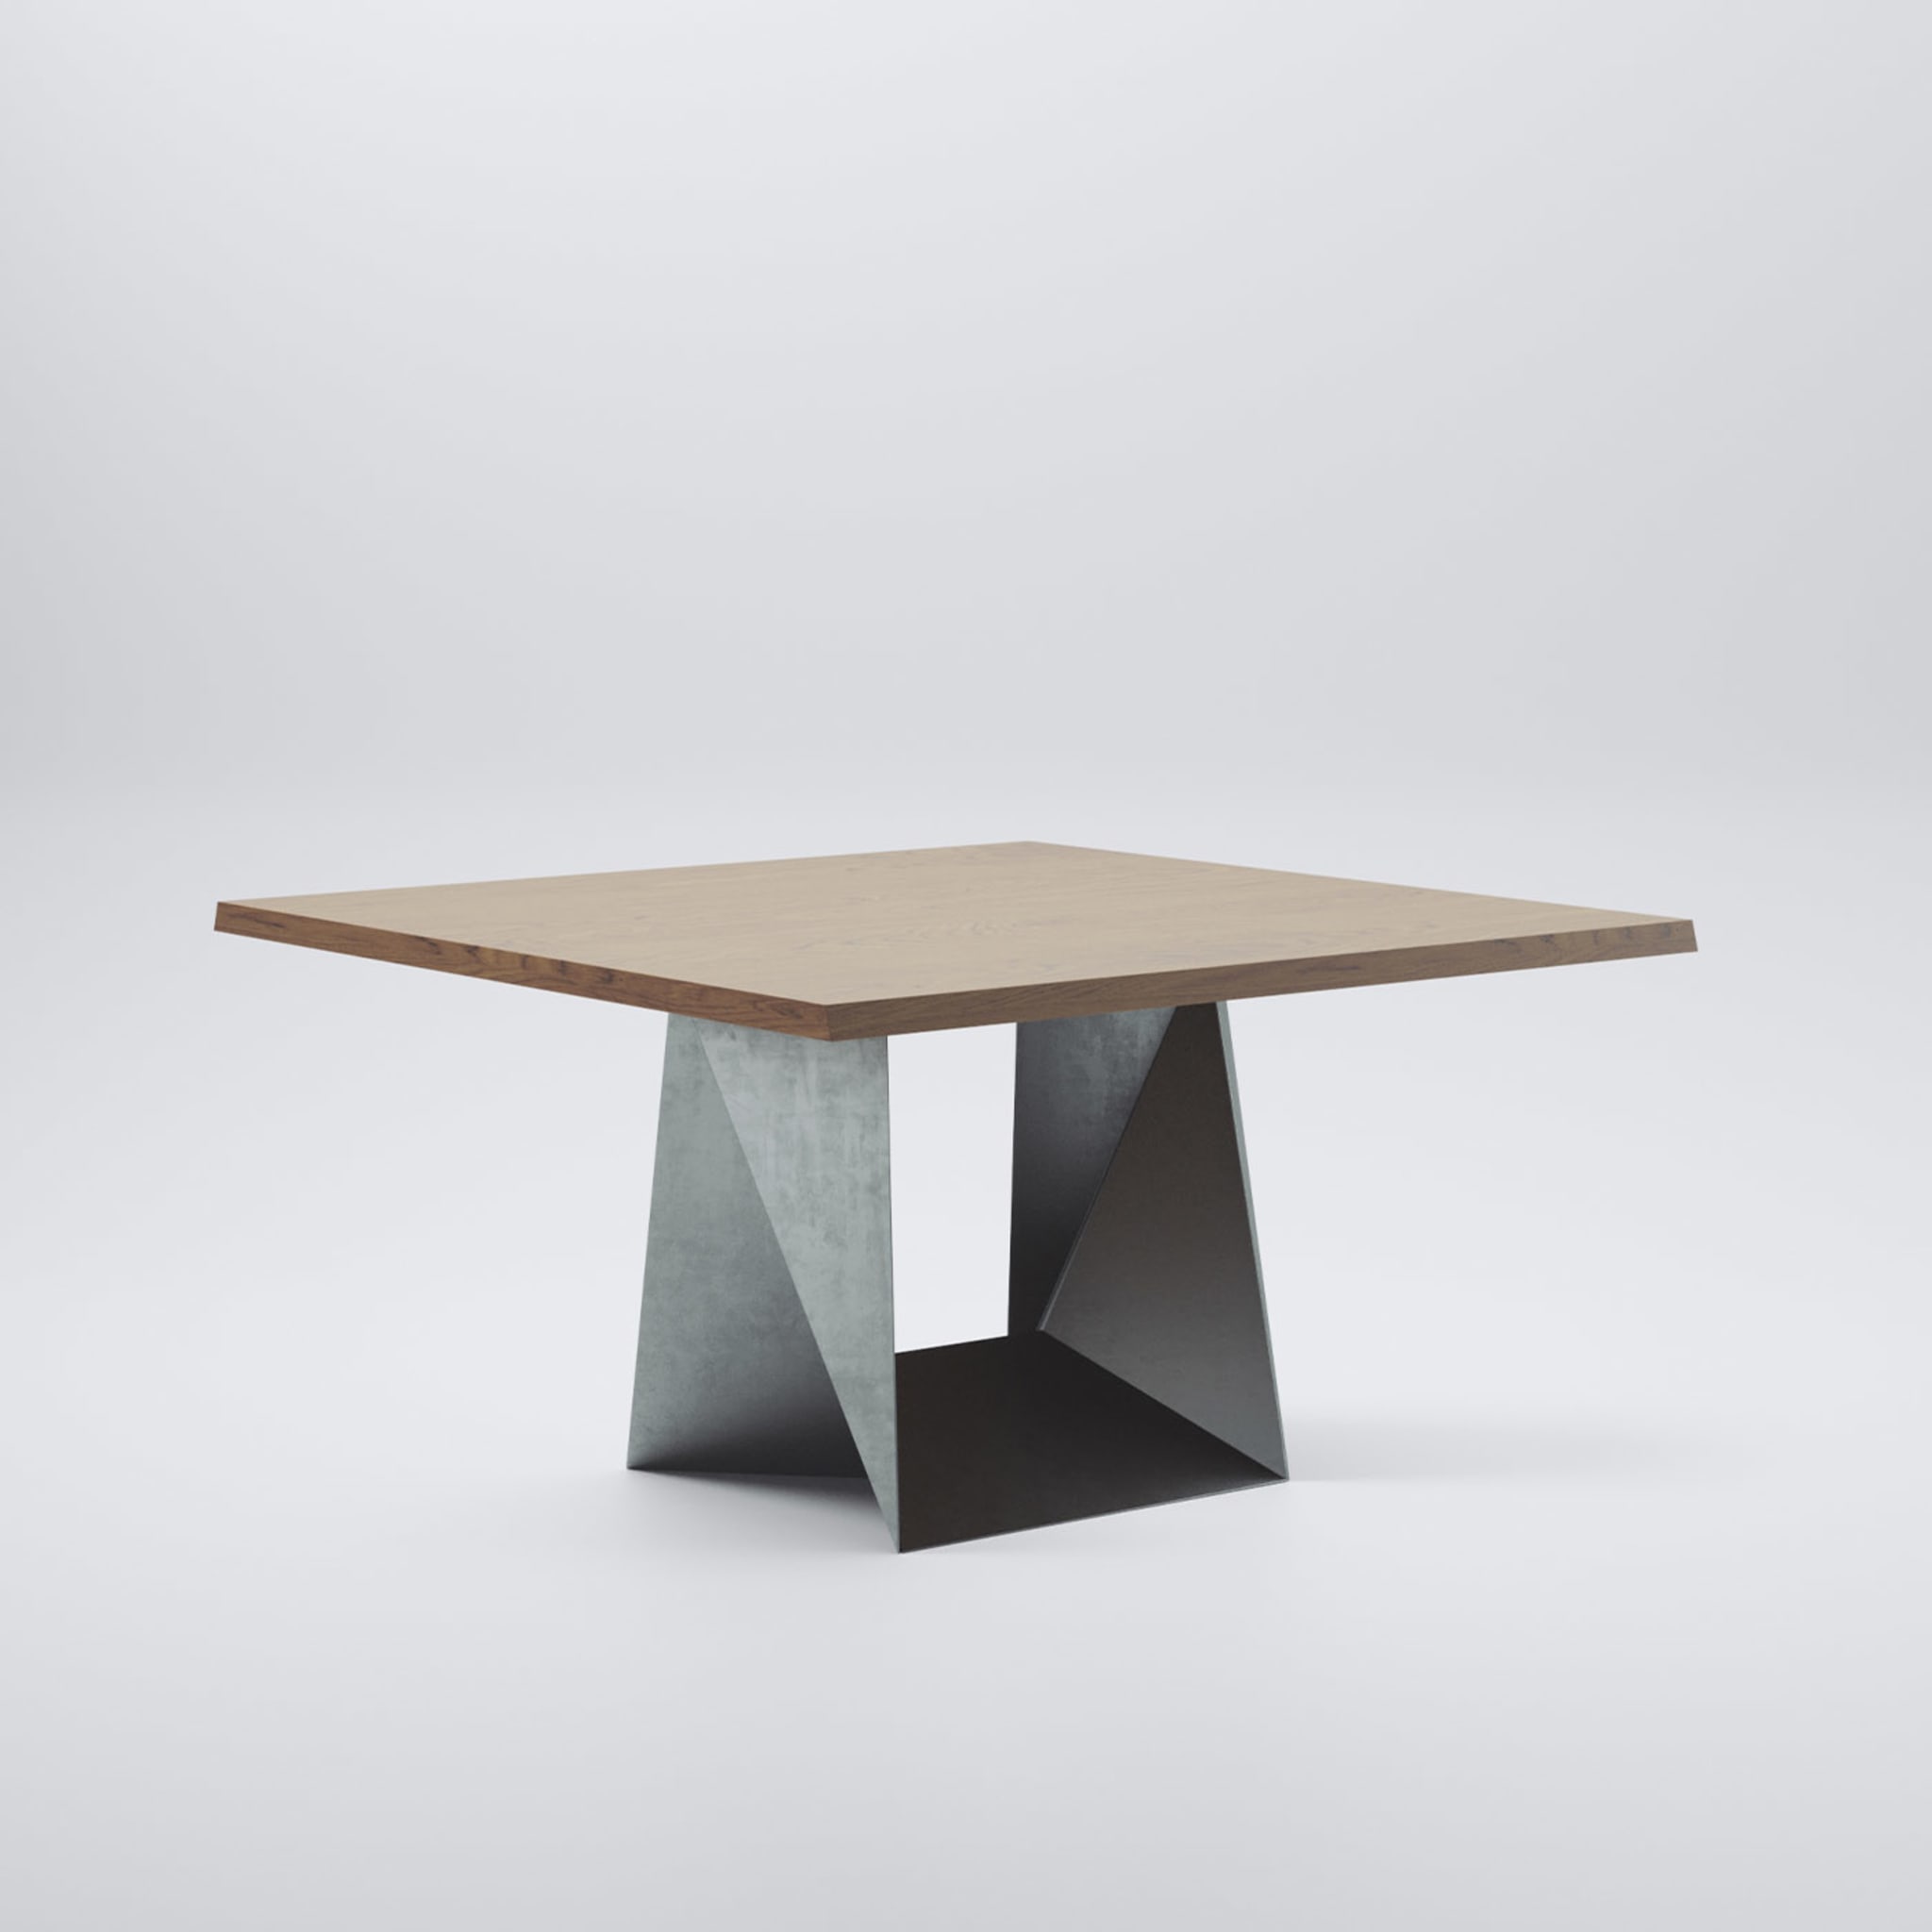 Clint Ash Walnut Square Dining Table  - Alternative view 1